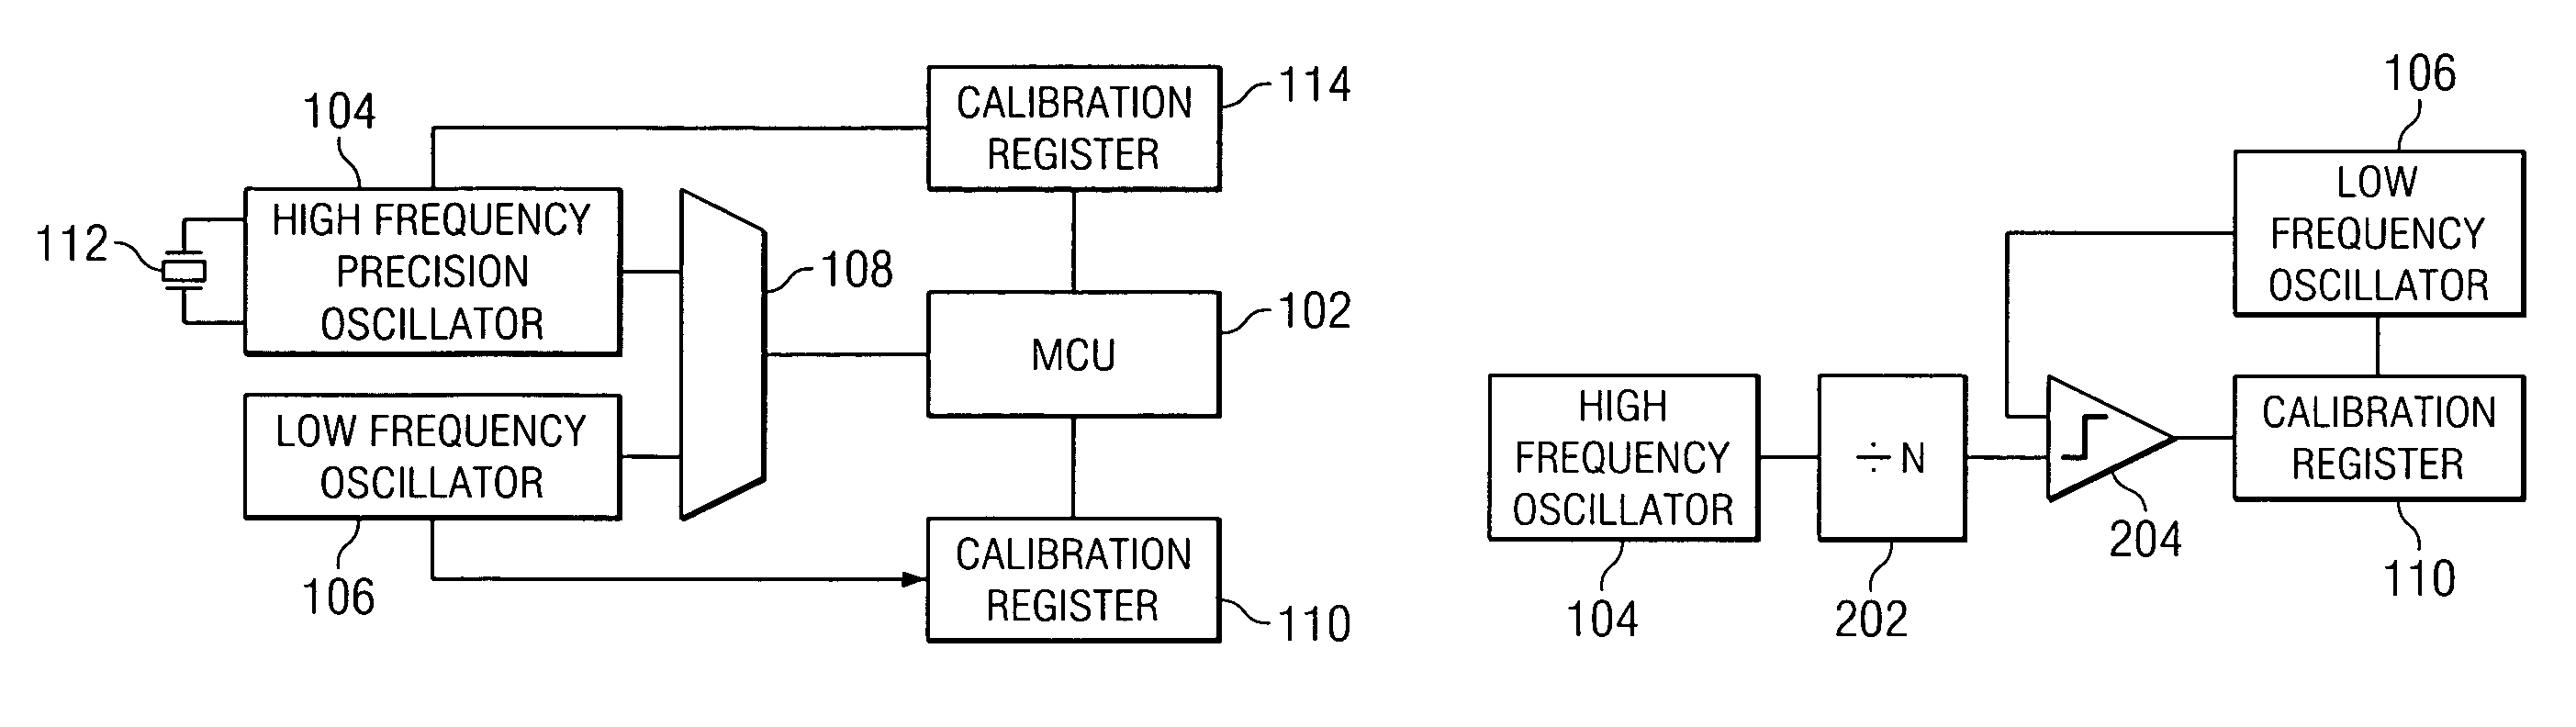 Method and apparatus for calibration of a low frequency oscillator in a processor based system